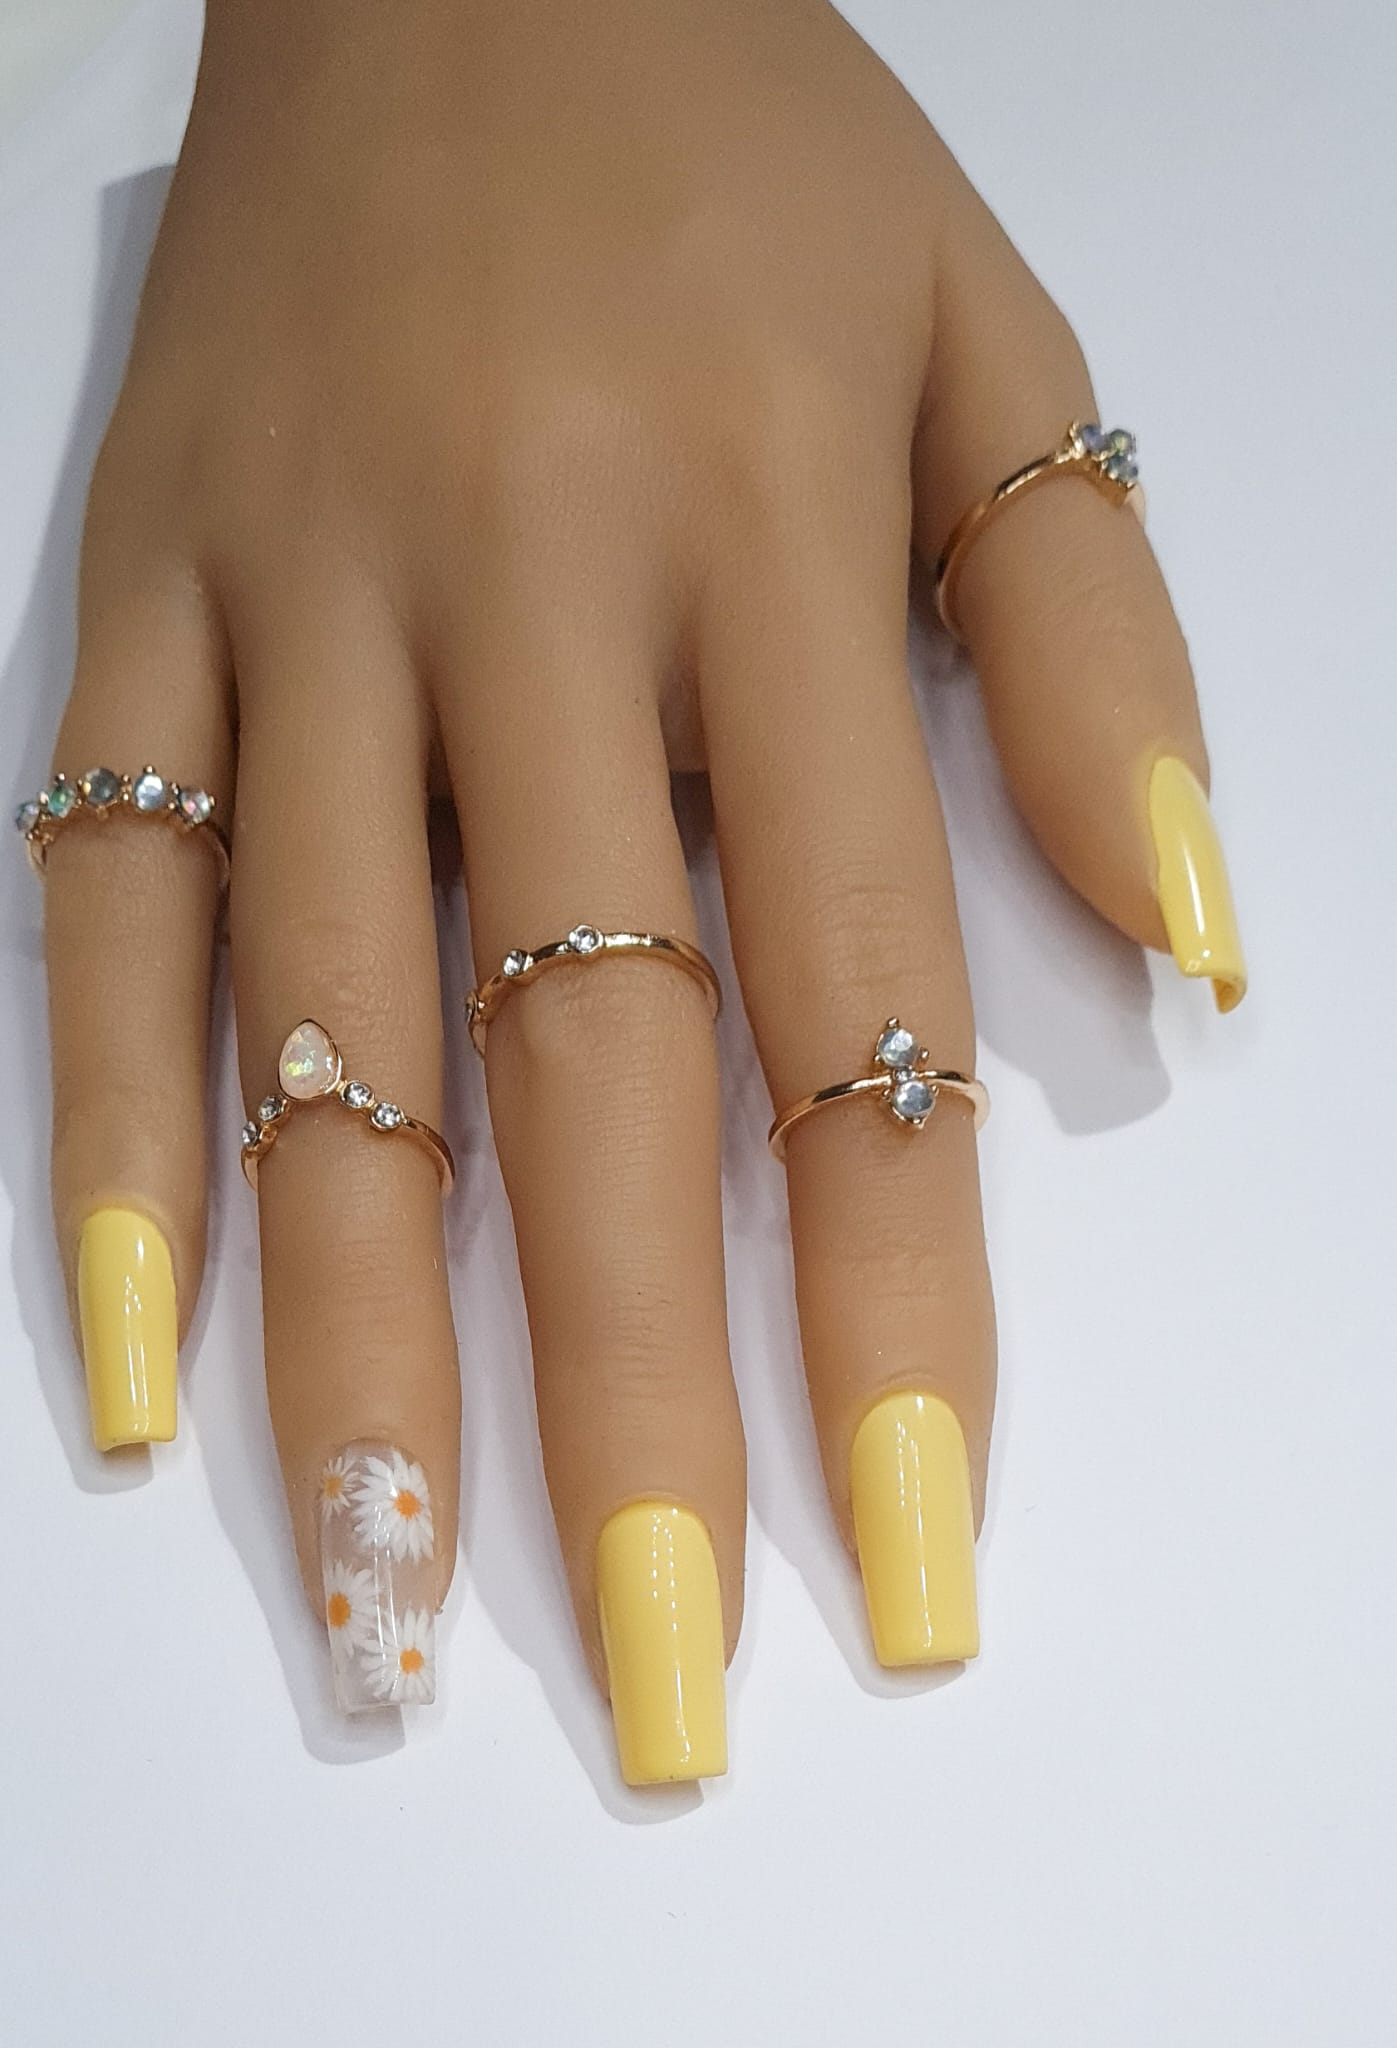 Medium Square Shaped Stunning Yellow flower design Spring/Summer2023 collection full cover gel tip luxury false nails salon quality hand painted custom made uk